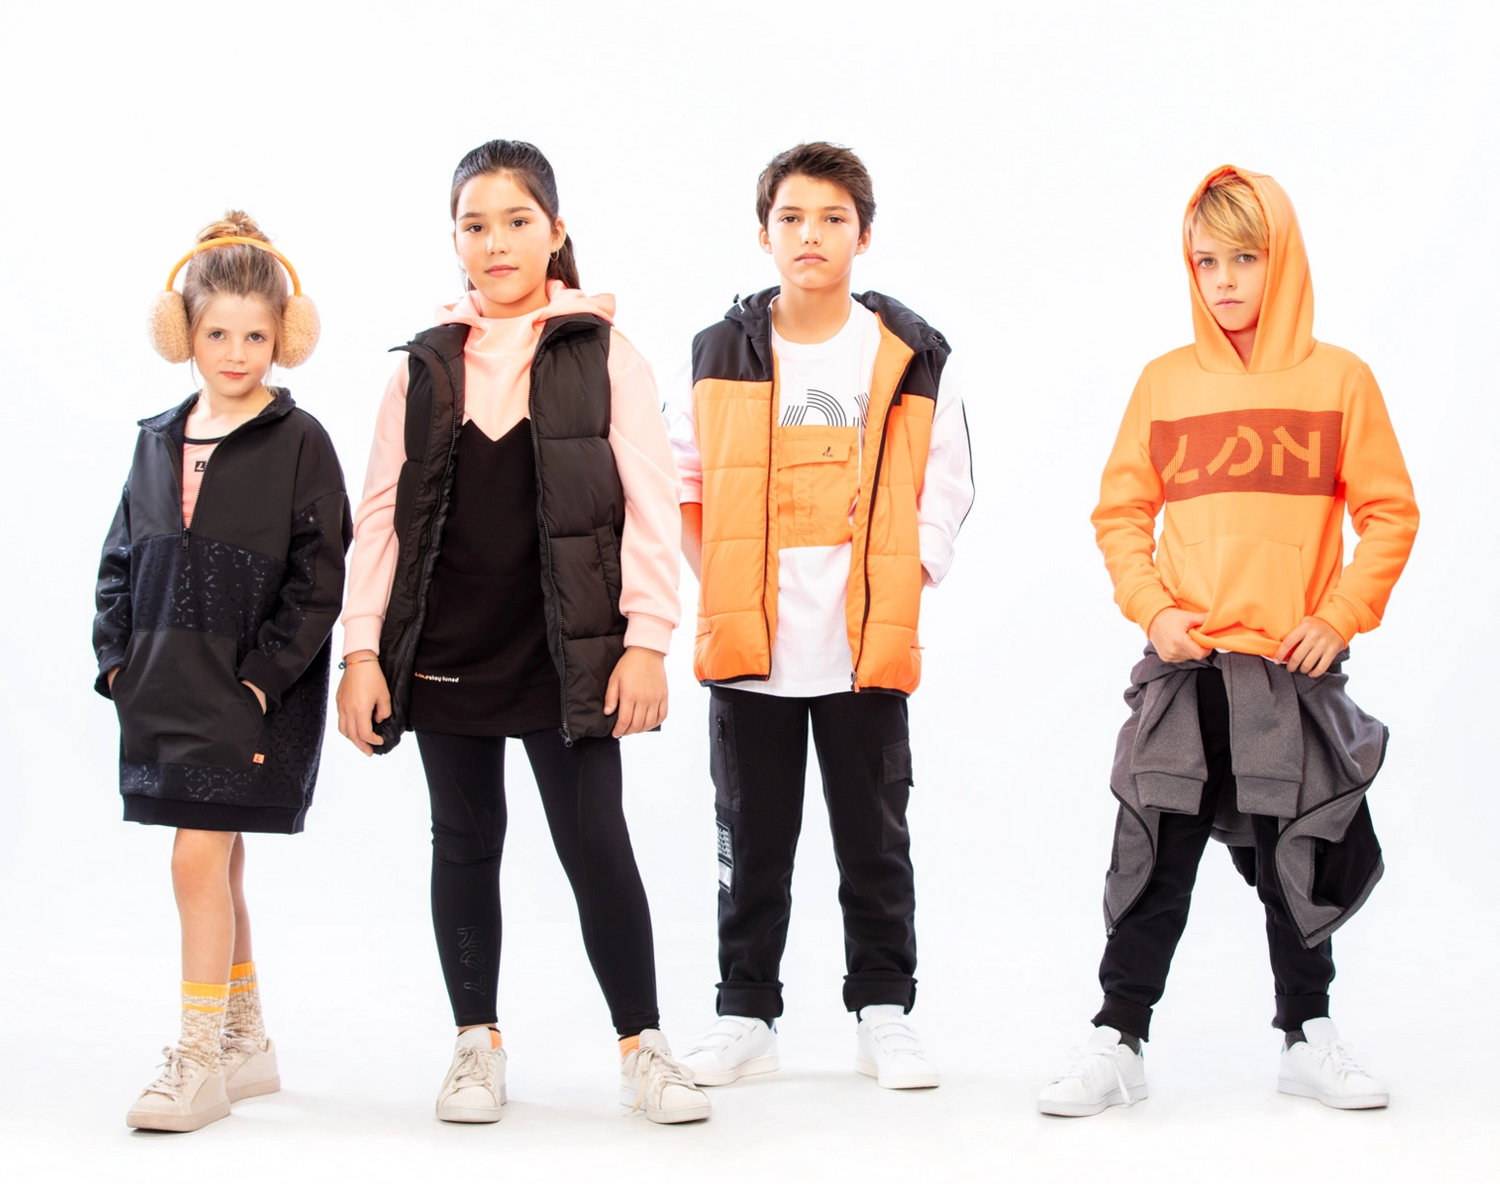 Four kids standing in a line next to each other, wearing black and orange colored clothing